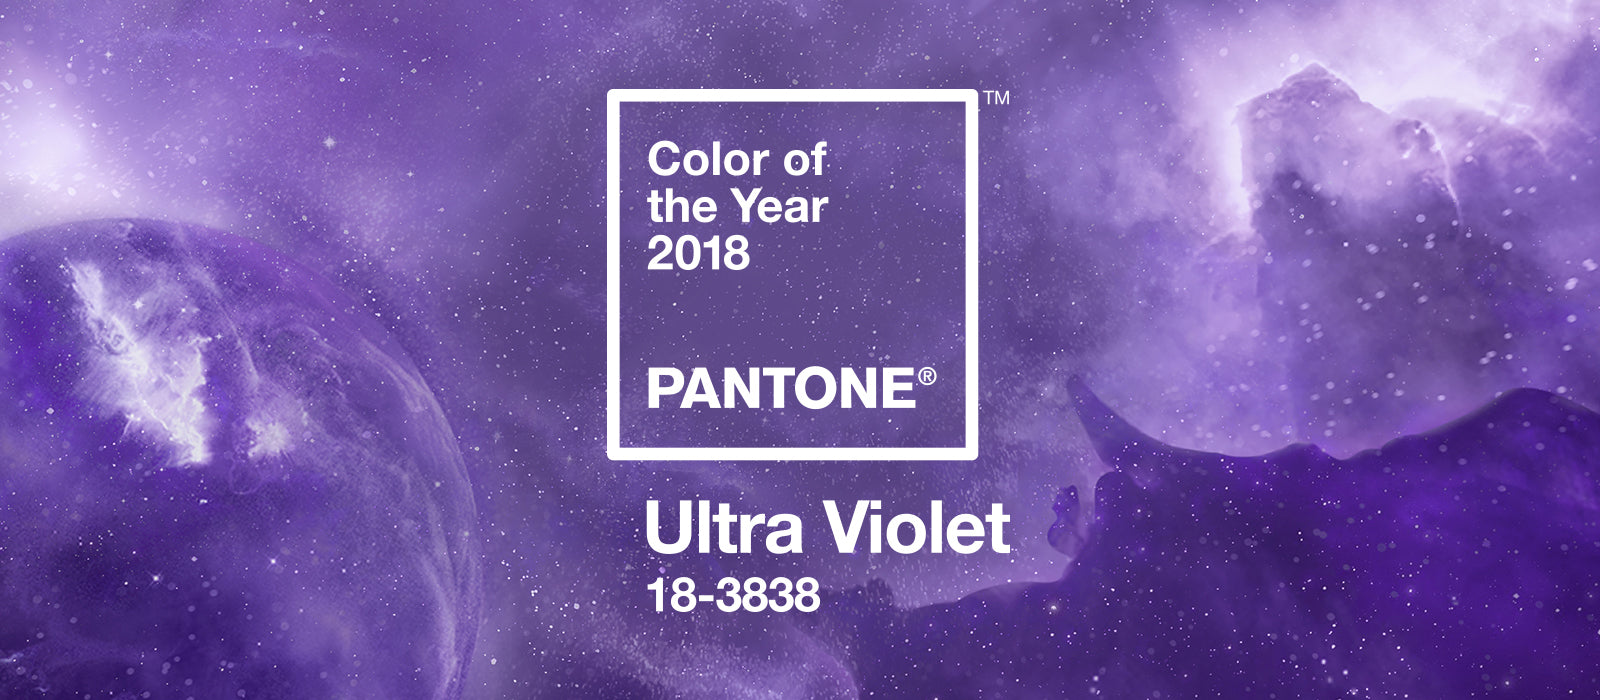 Colour of the Year 2018